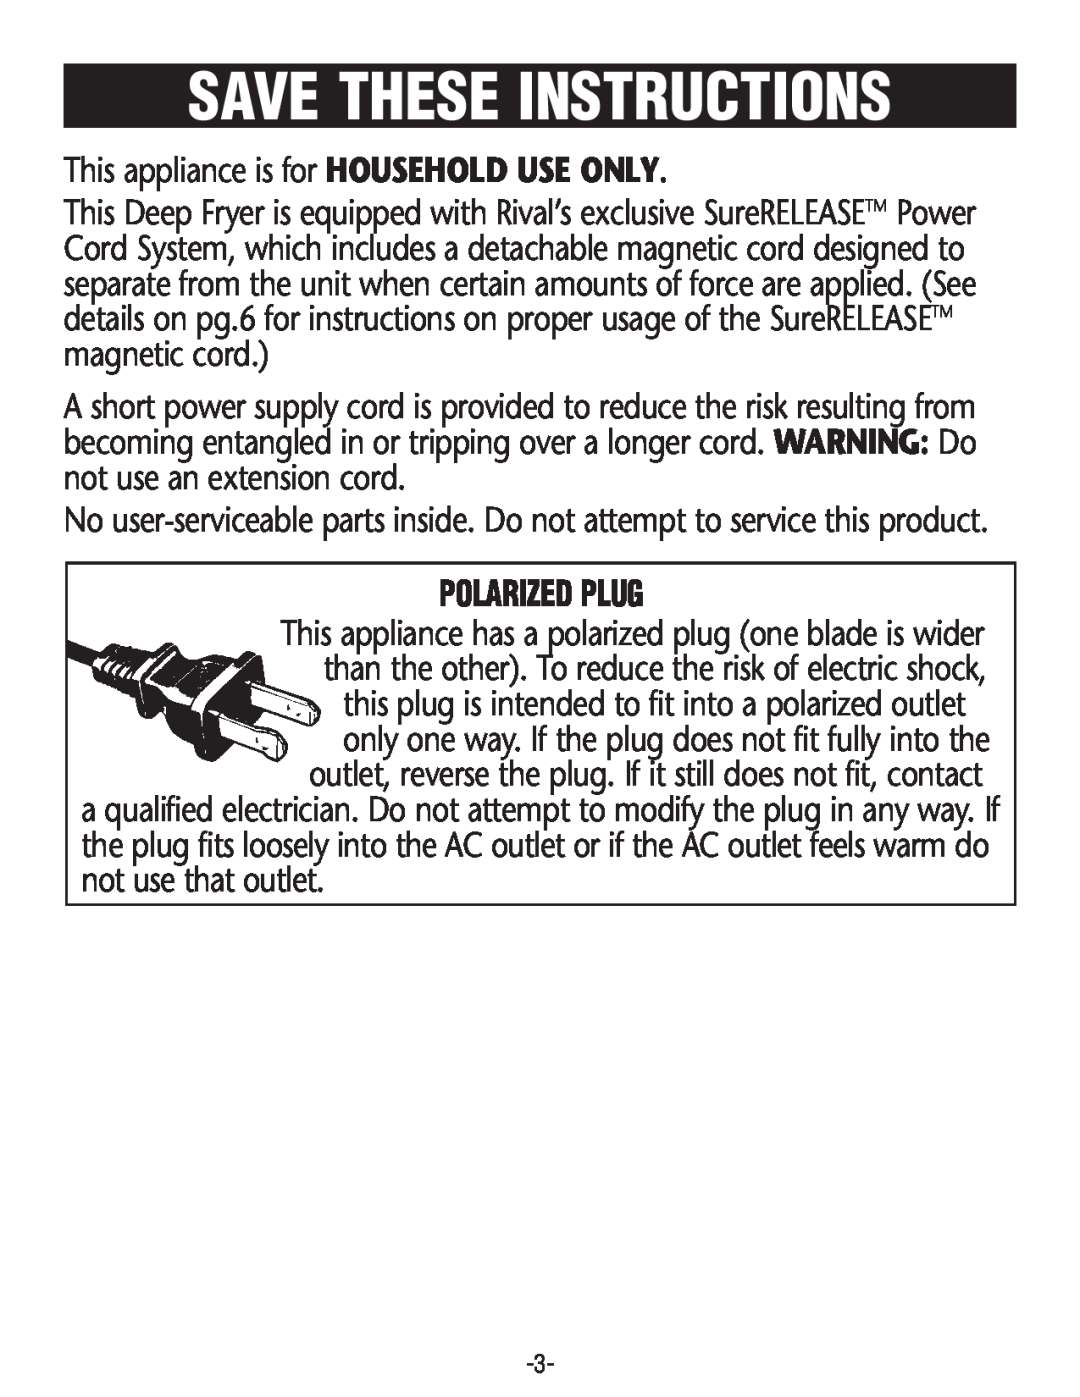 Rival CF106-W manual Polarized Plug, Save These Instructions 